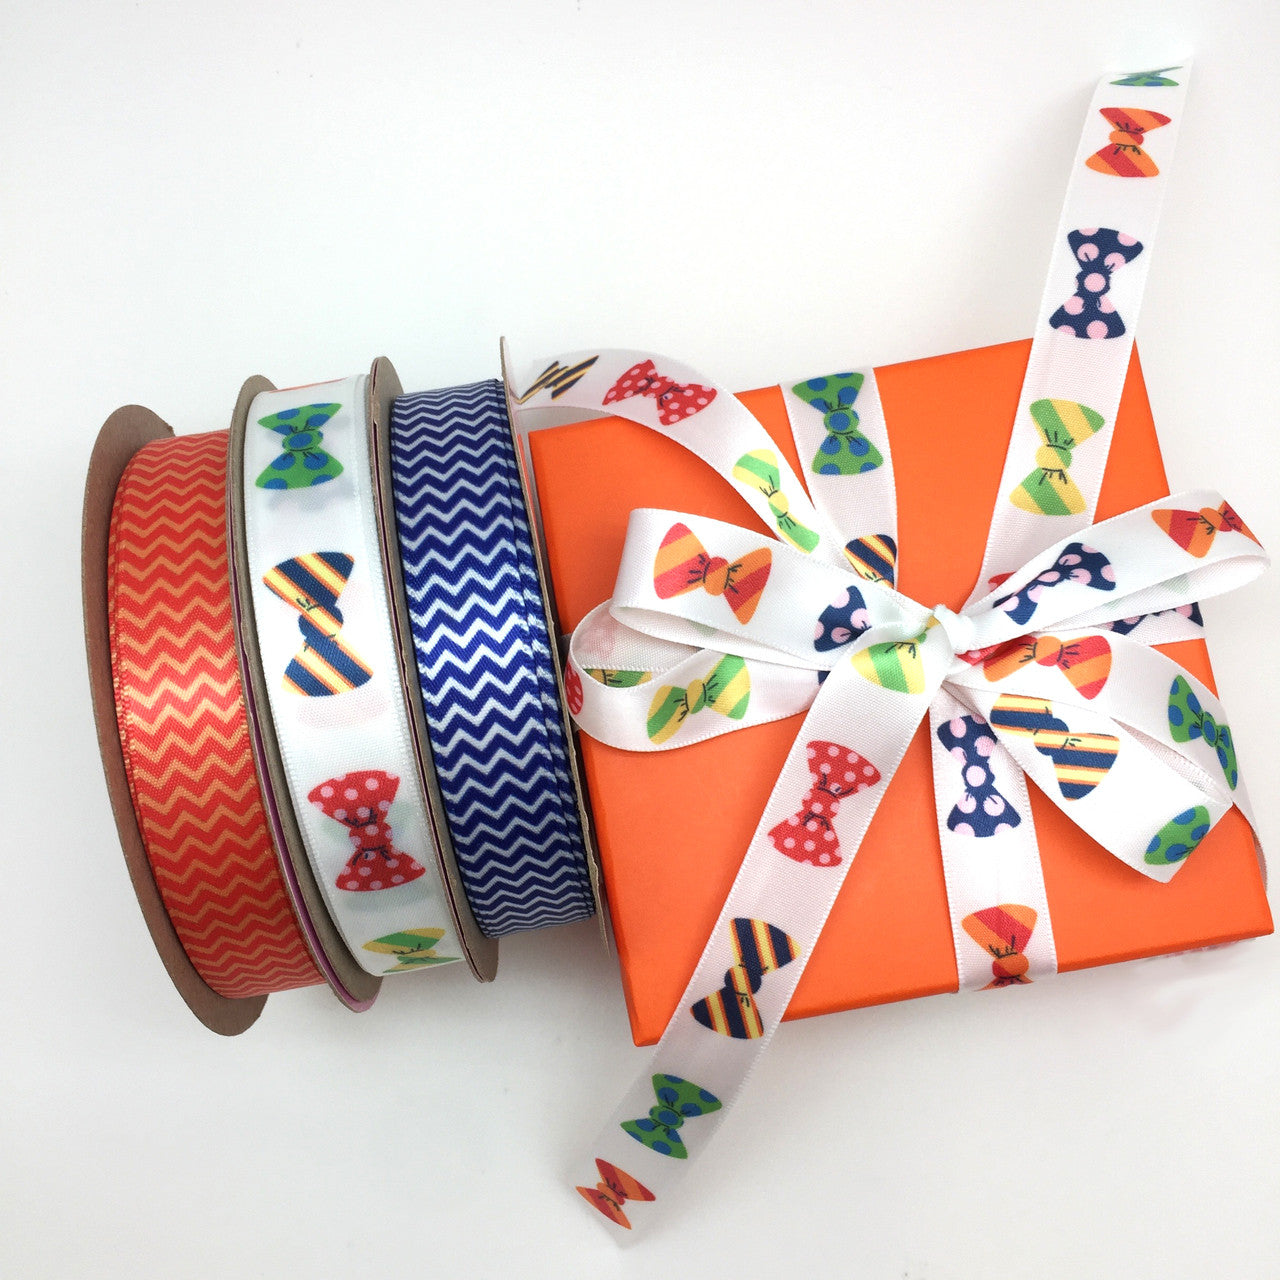 Mix and match our bowties with chevron ribbons for colorful package surely to please the recipient!